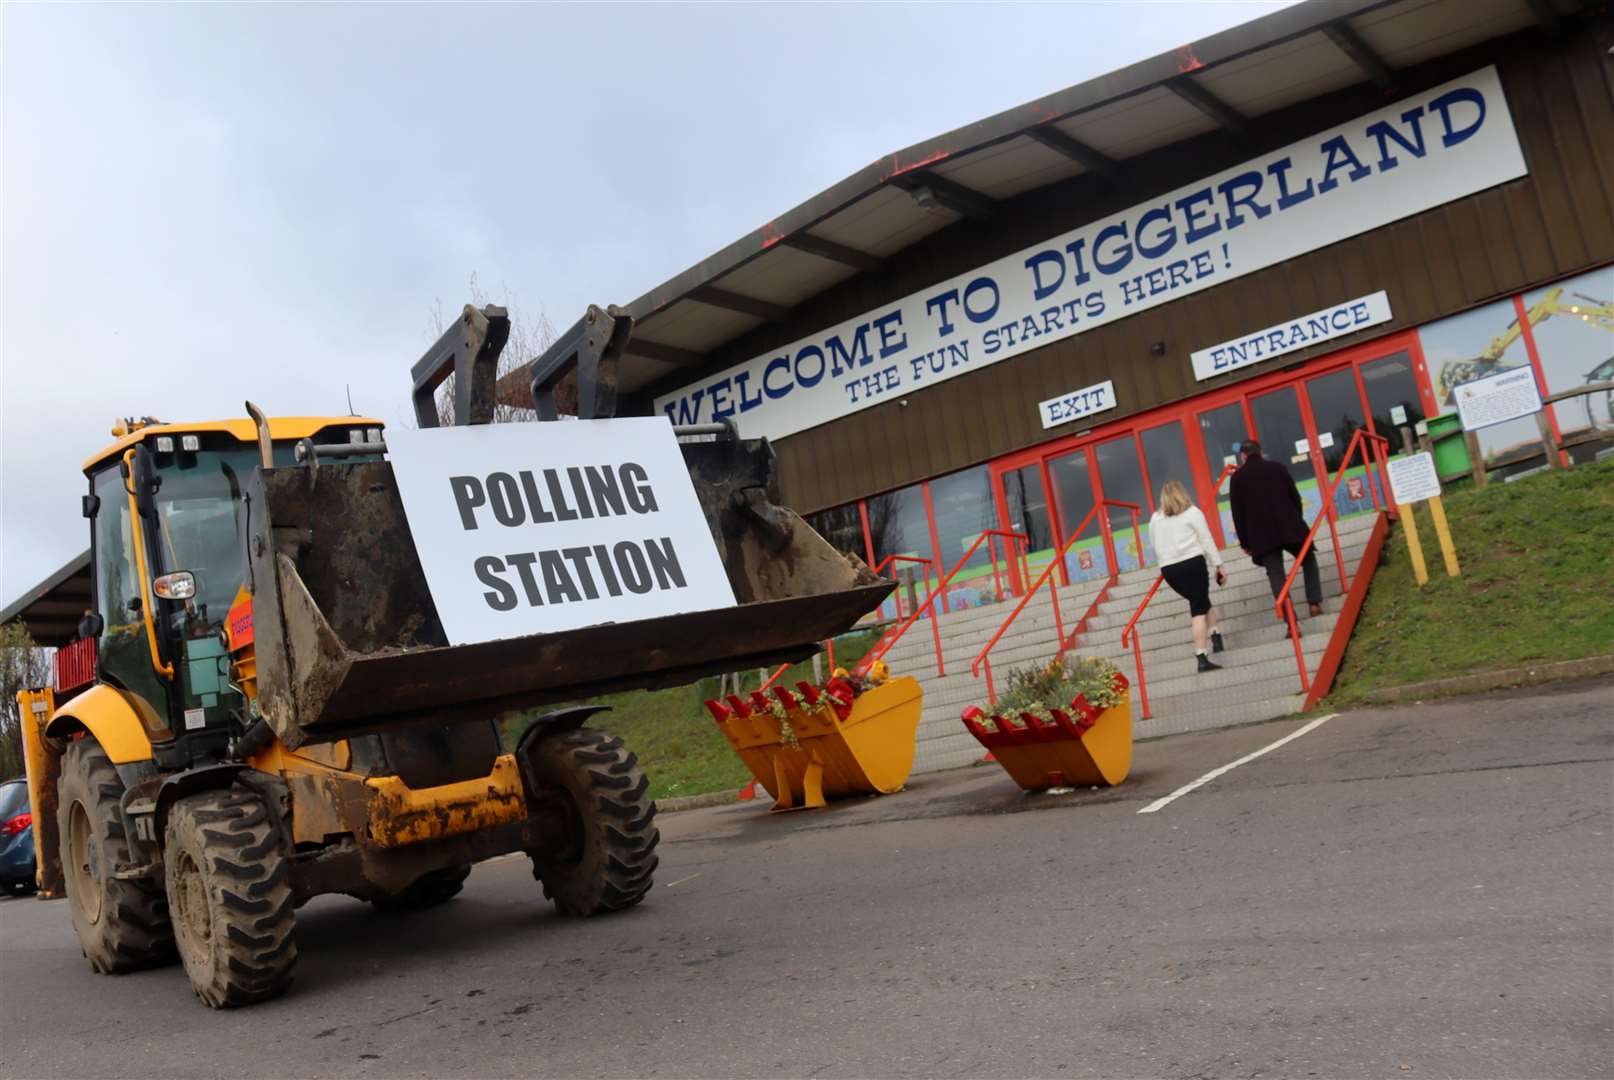 Diggerland at Medway Valley Leisure Park is a polling station in today’s local elections in Medway